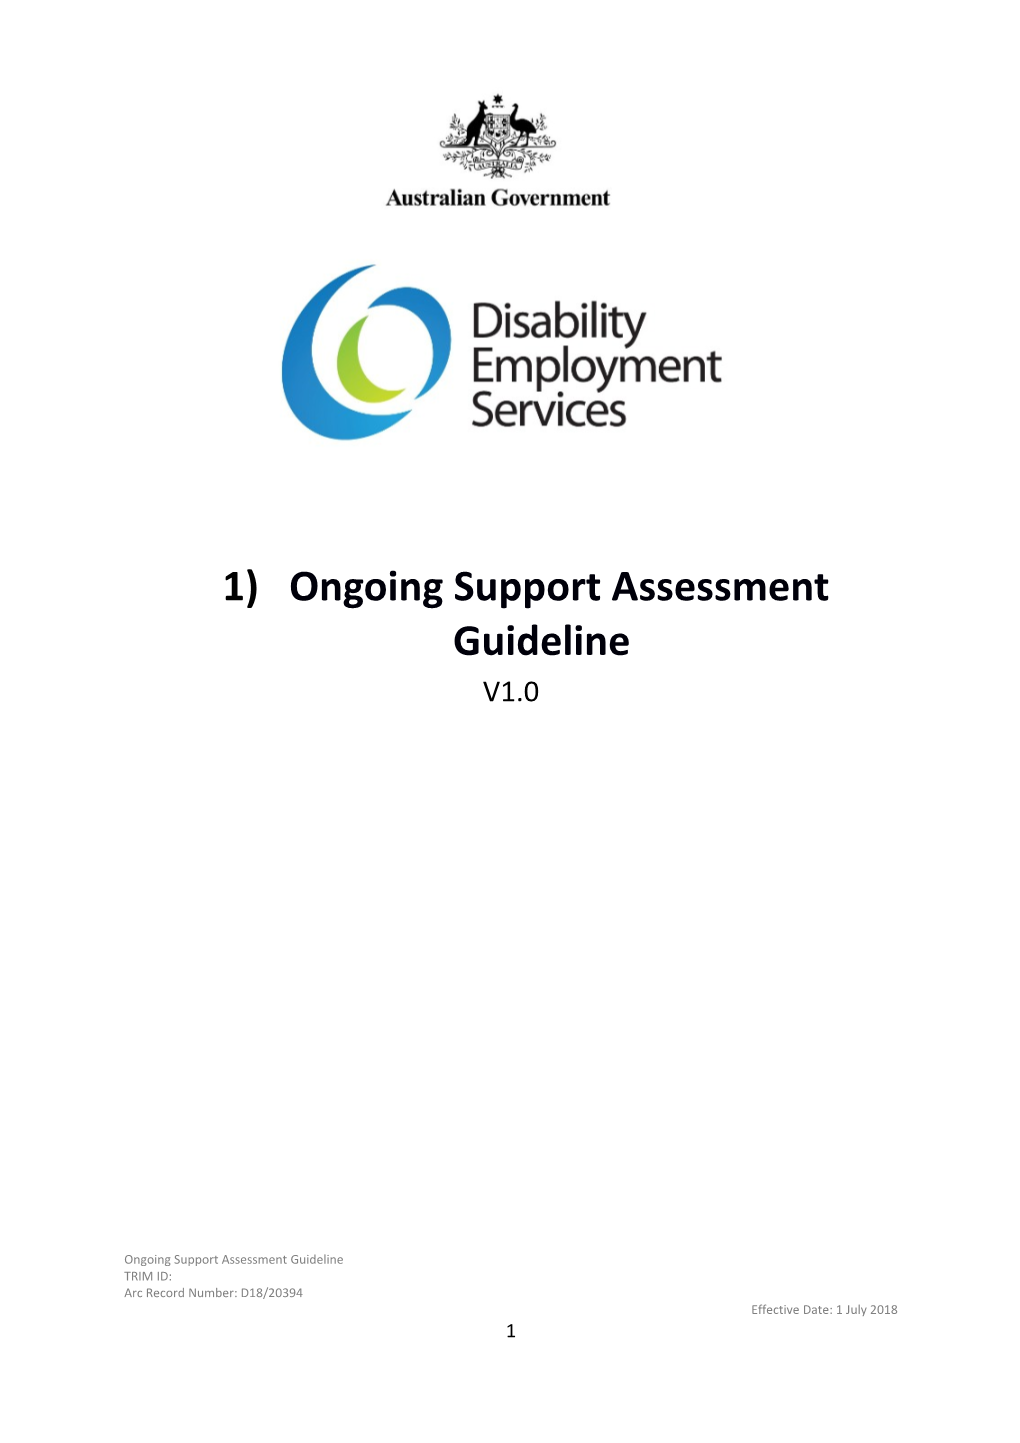 Ongoing Support Assessment Guidelines V1.10